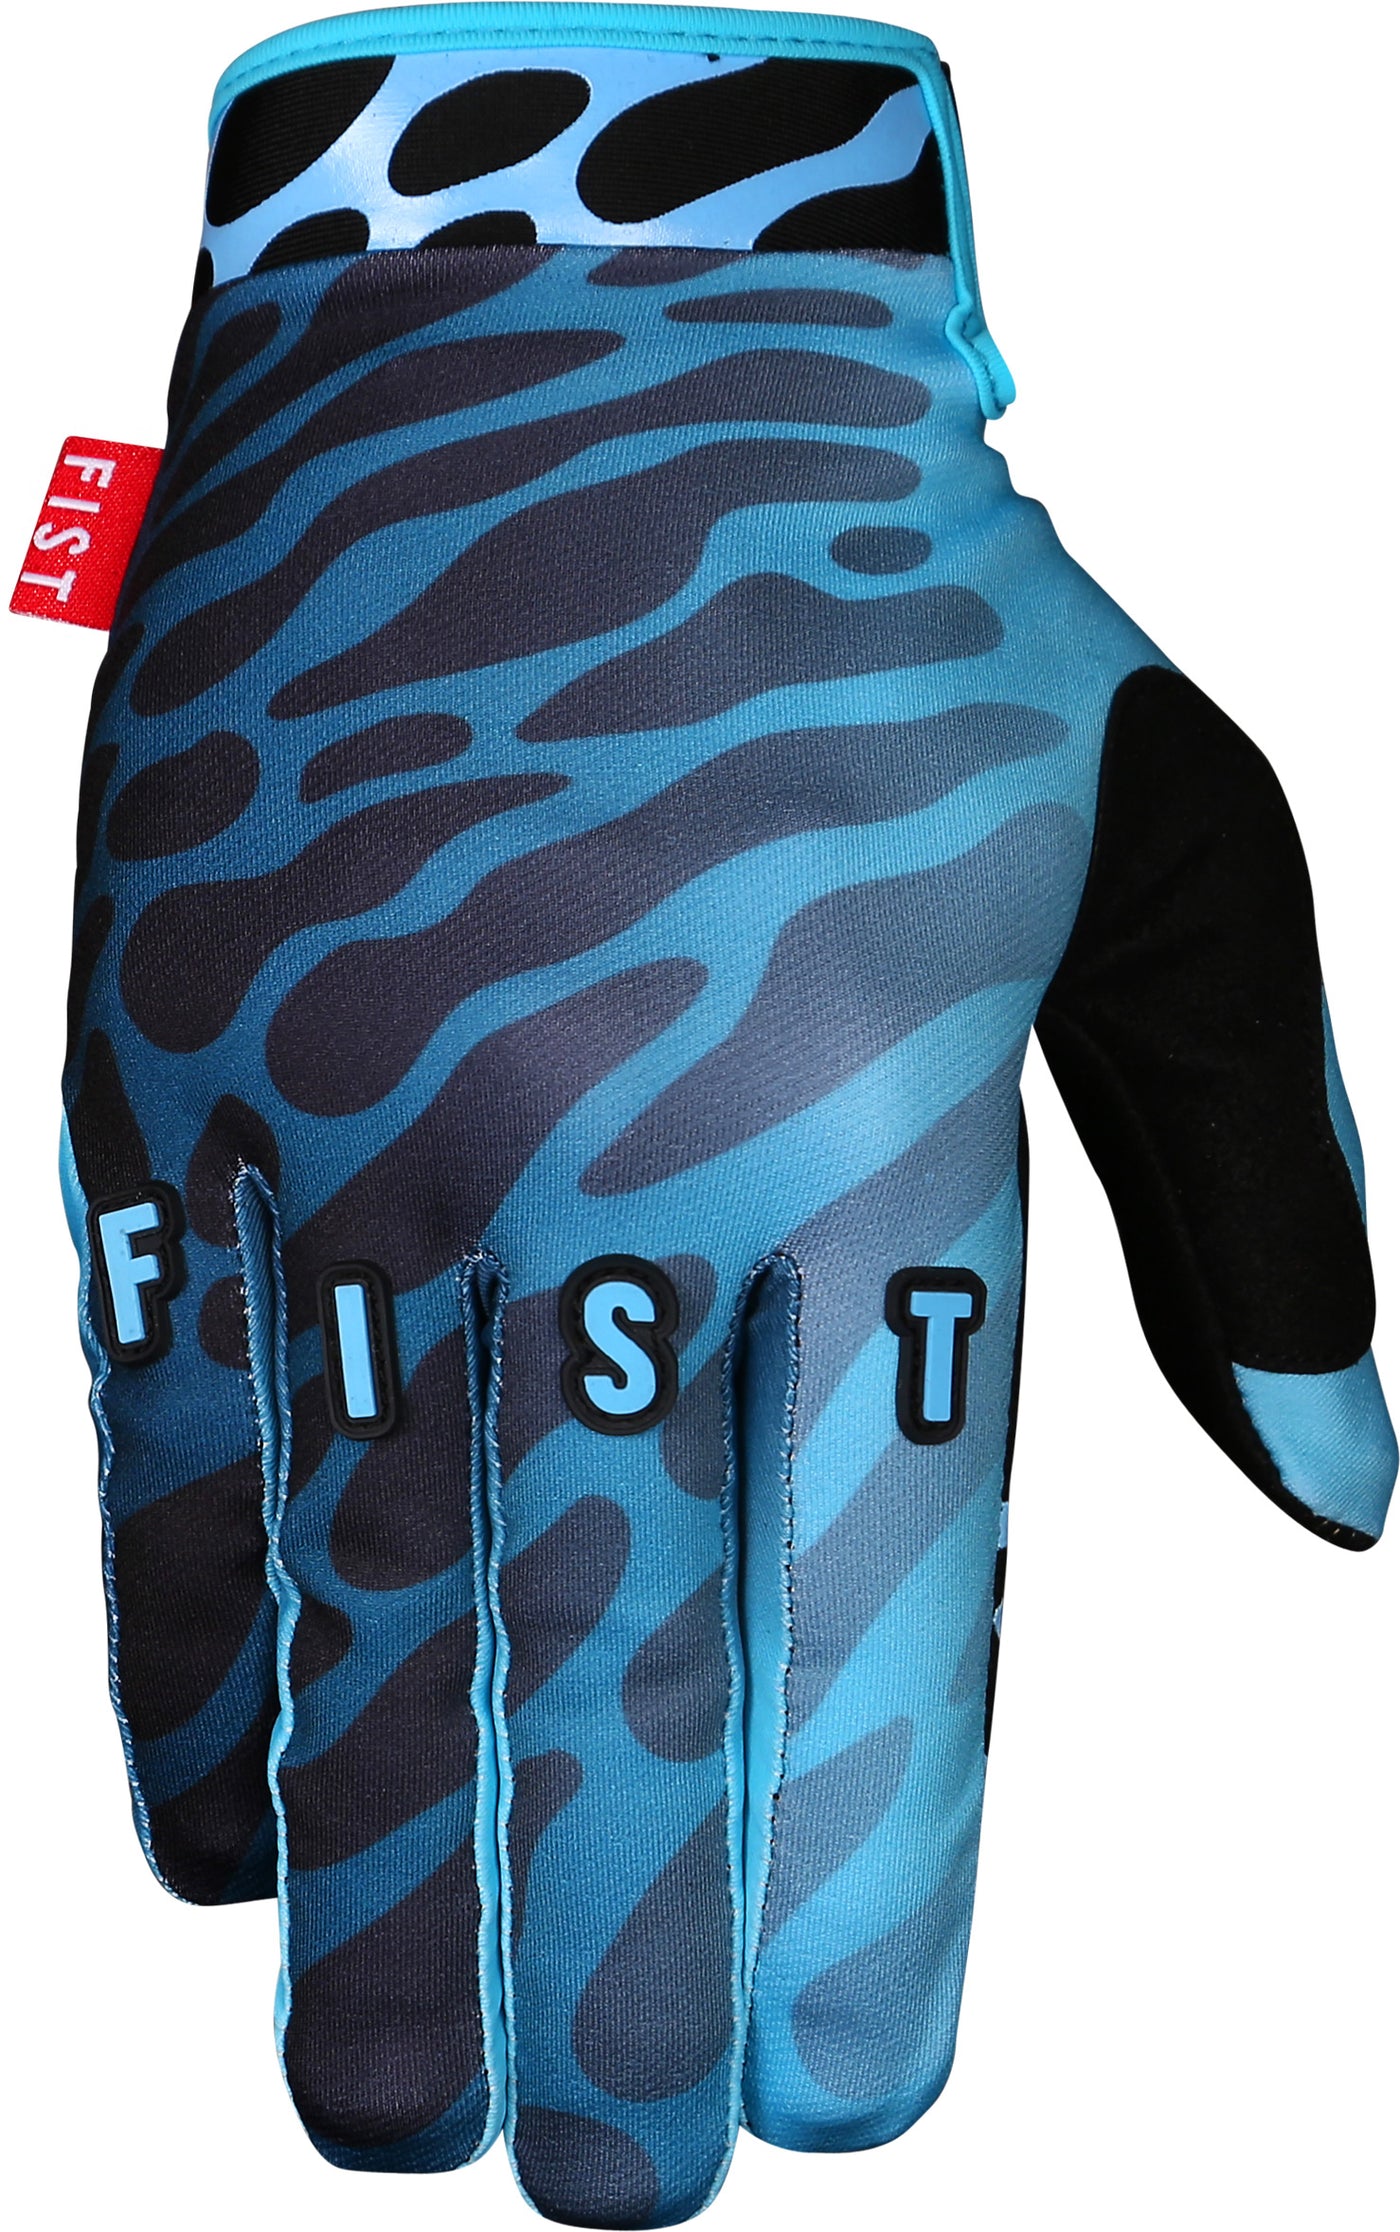 Fist Hand Wear - Chapter 16 Collection - Tiger Shark